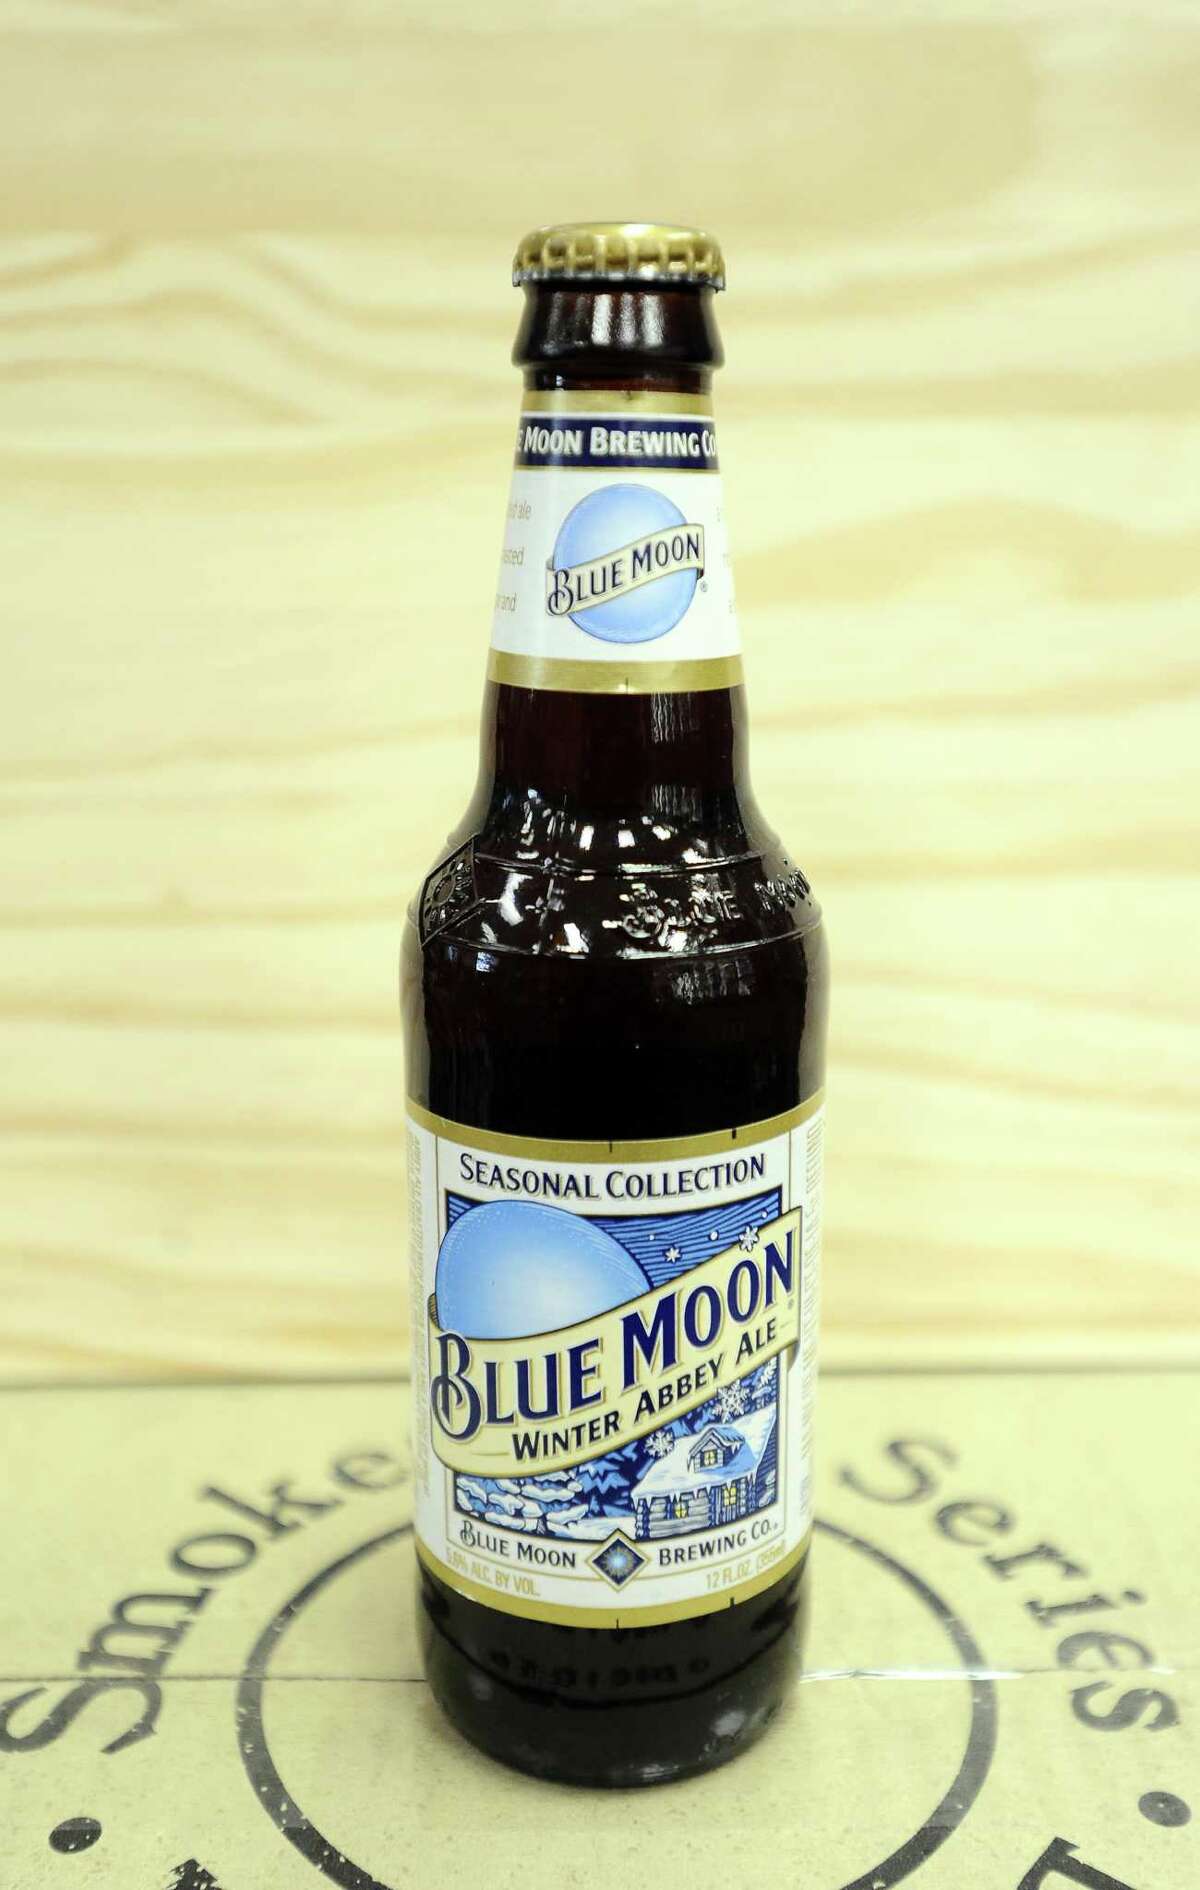 The popular Blue Moon is made by a giant brewery.